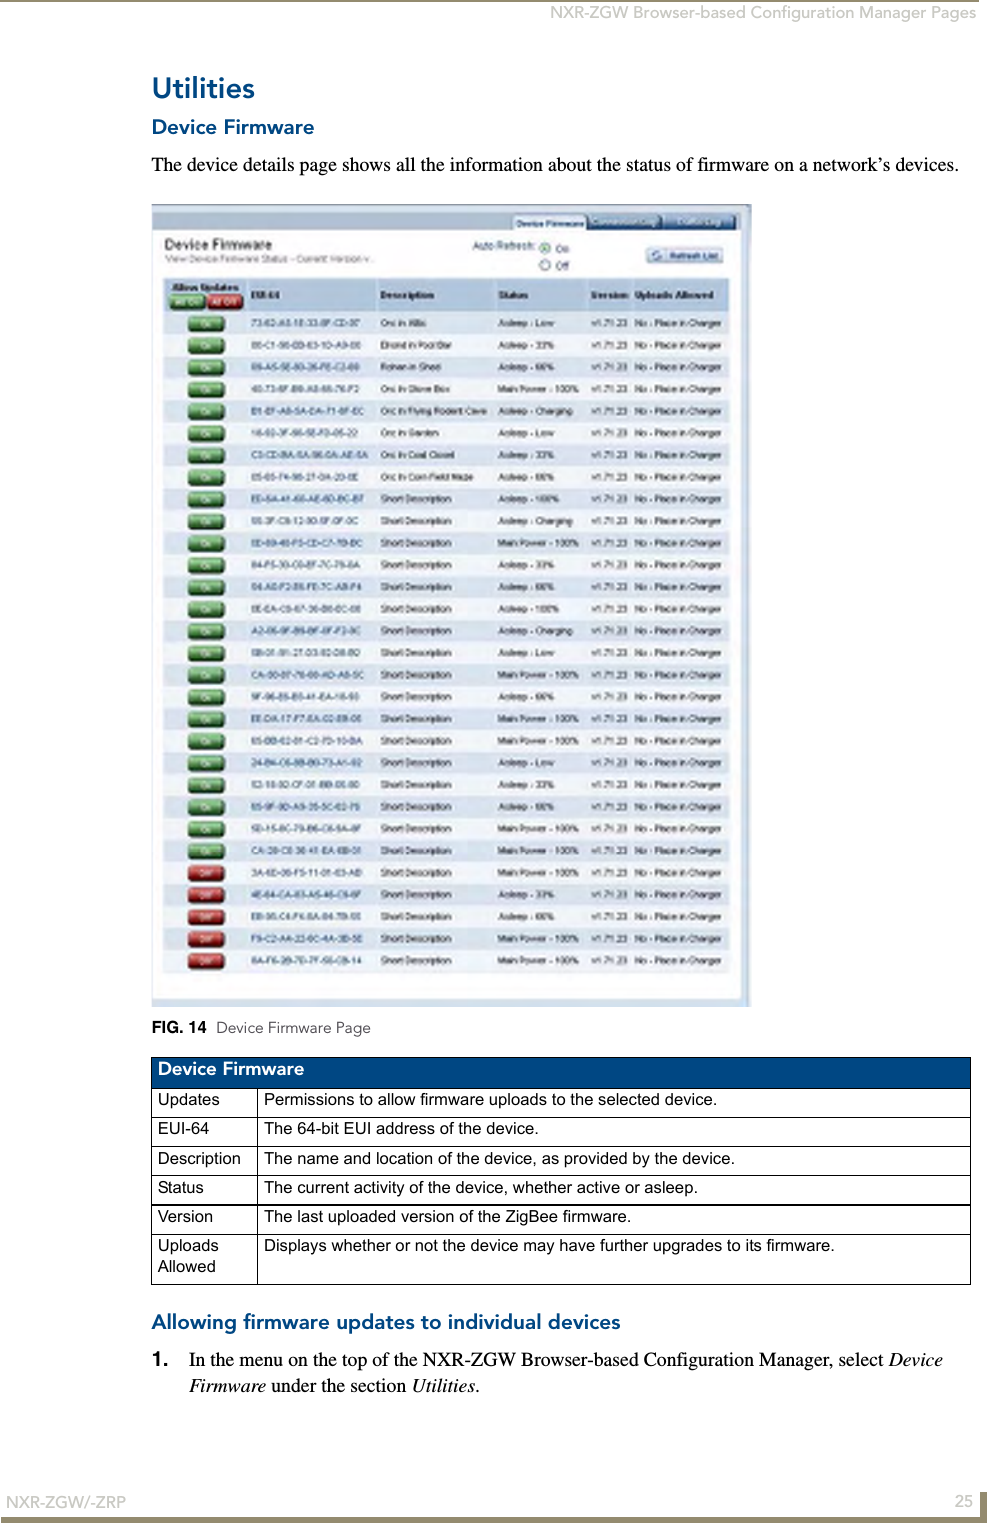 NXR-ZGW Browser-based Configuration Manager Pages25NXR-ZGW/-ZRPUtilitiesDevice FirmwareThe device details page shows all the information about the status of firmware on a network’s devices. Allowing firmware updates to individual devices1. In the menu on the top of the NXR-ZGW Browser-based Configuration Manager, select Device Firmware under the section Utilities.FIG. 14  Device Firmware PageDevice FirmwareUpdates Permissions to allow firmware uploads to the selected device.EUI-64 The 64-bit EUI address of the device.Description The name and location of the device, as provided by the device.Status The current activity of the device, whether active or asleep.Version The last uploaded version of the ZigBee firmware.Uploads AllowedDisplays whether or not the device may have further upgrades to its firmware.